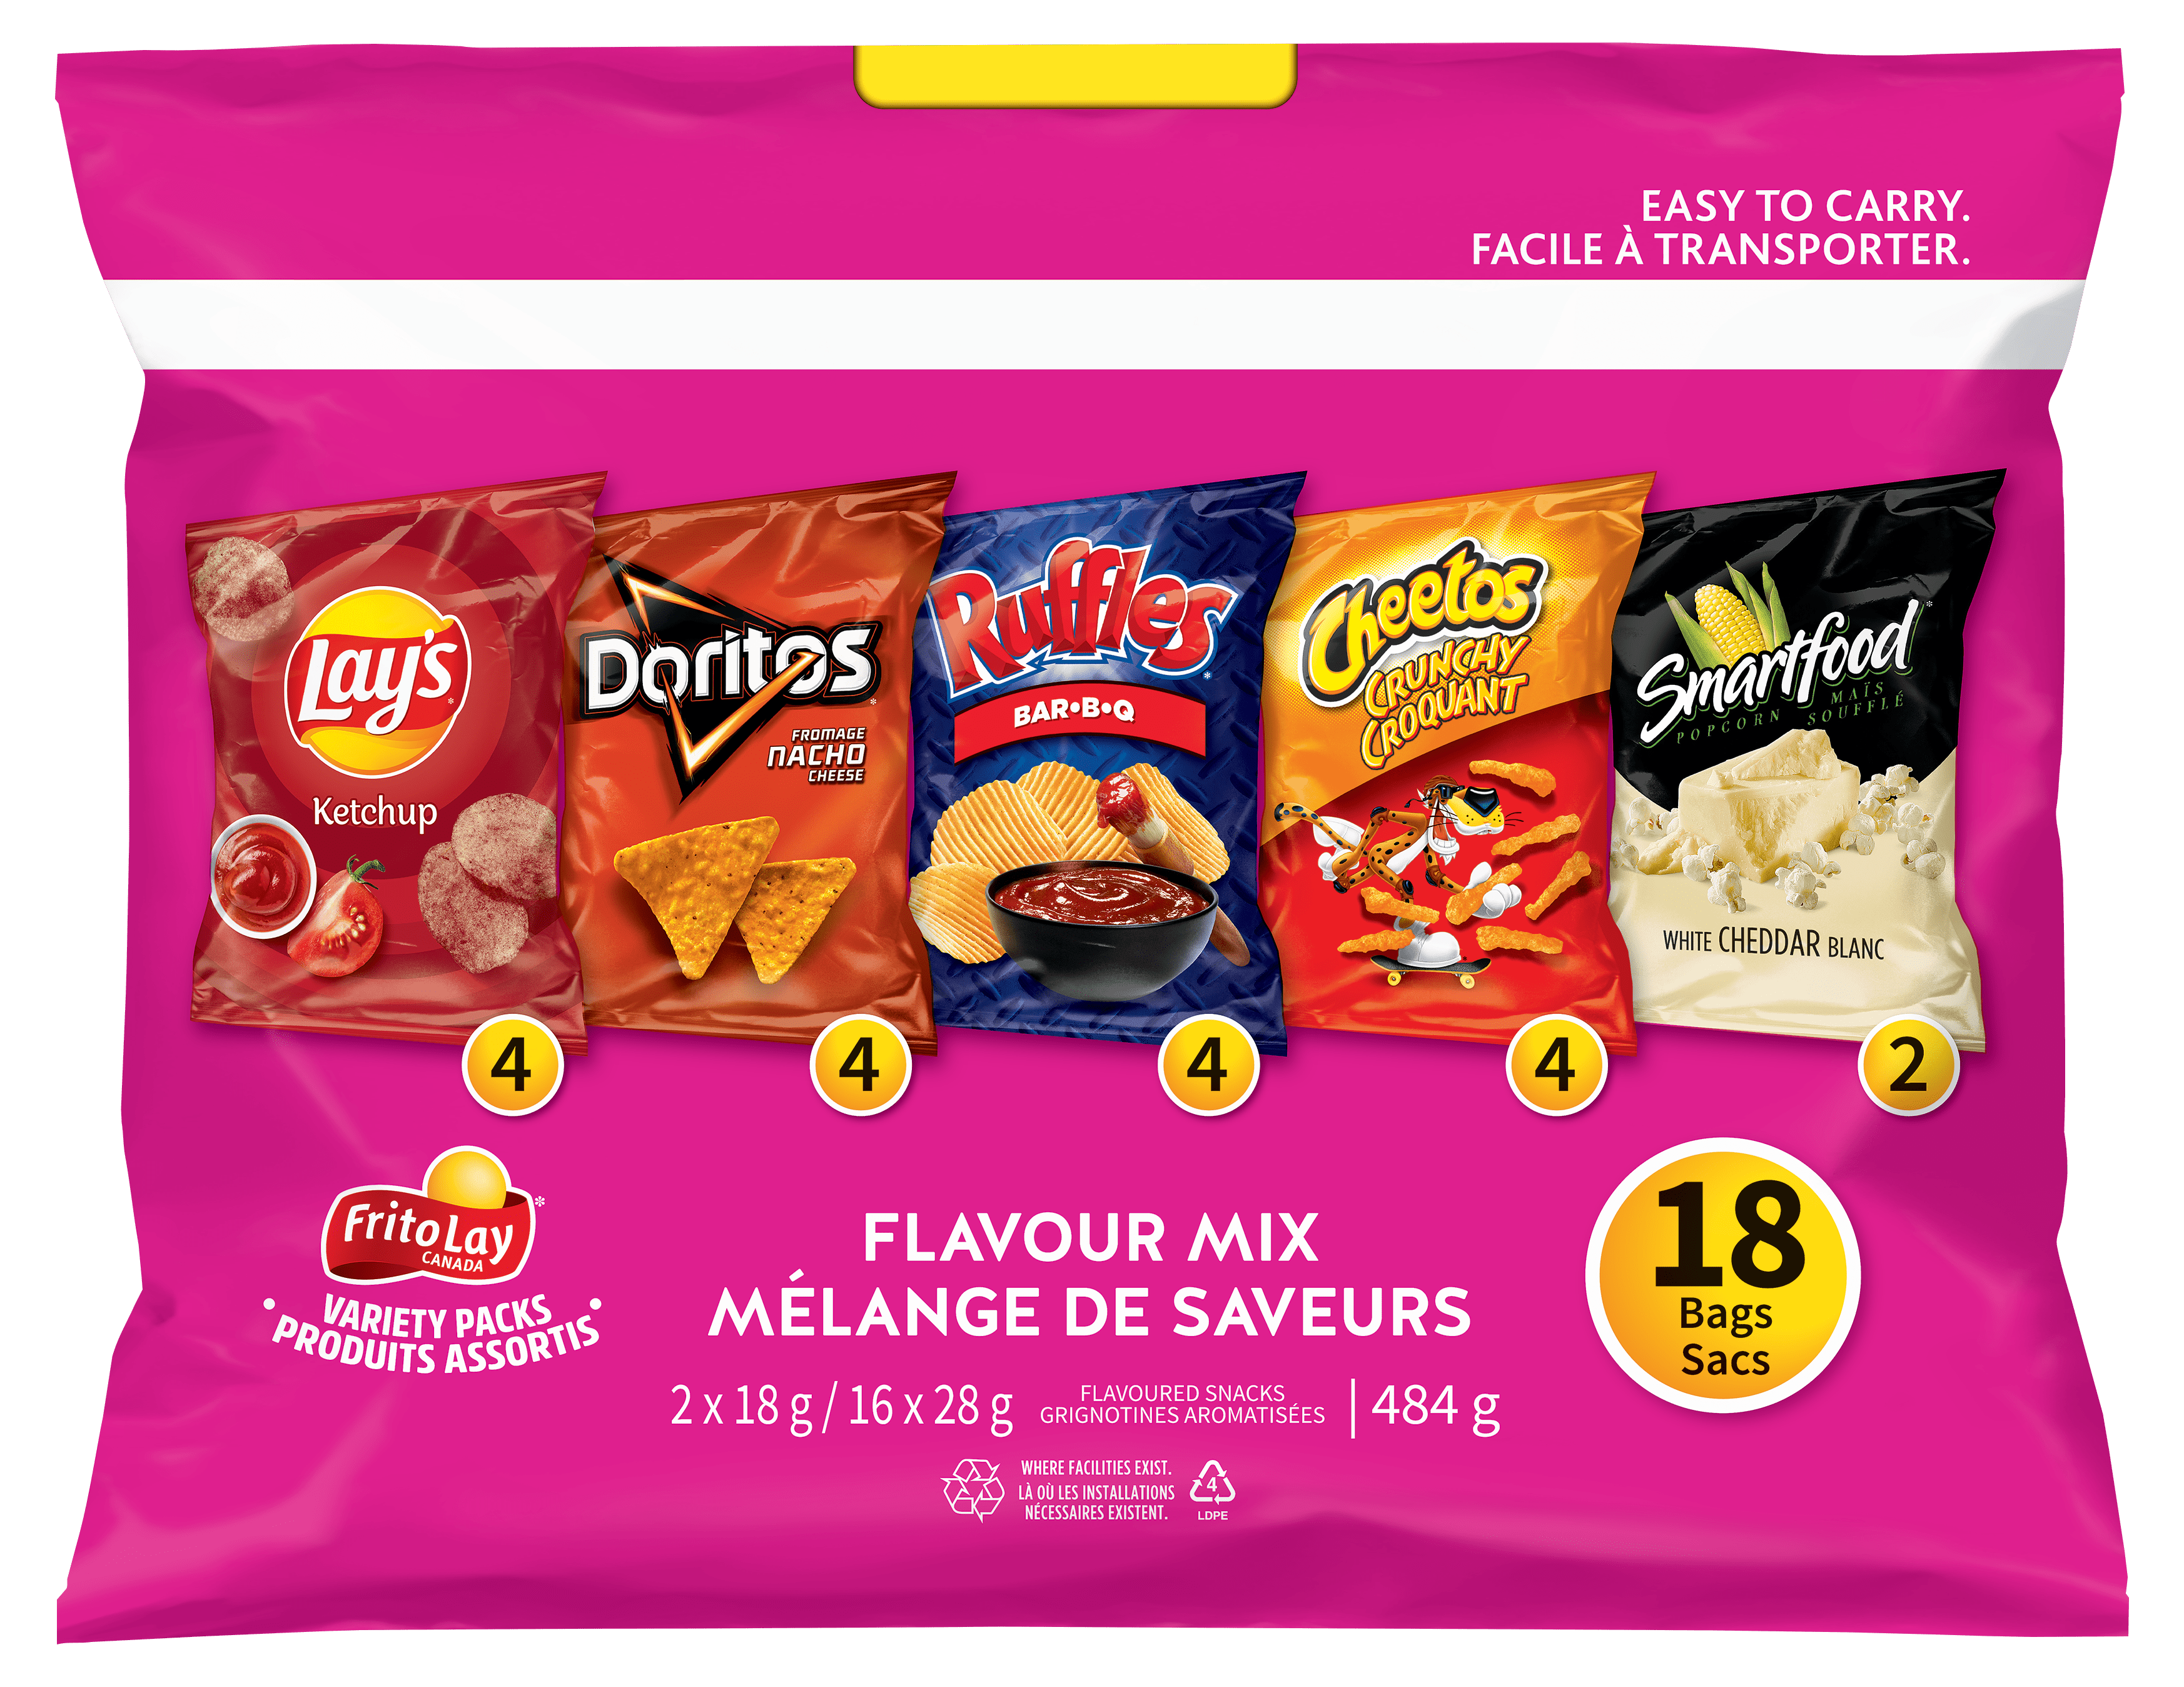 FRITO-LAY® Variety Pack Flavour Mix